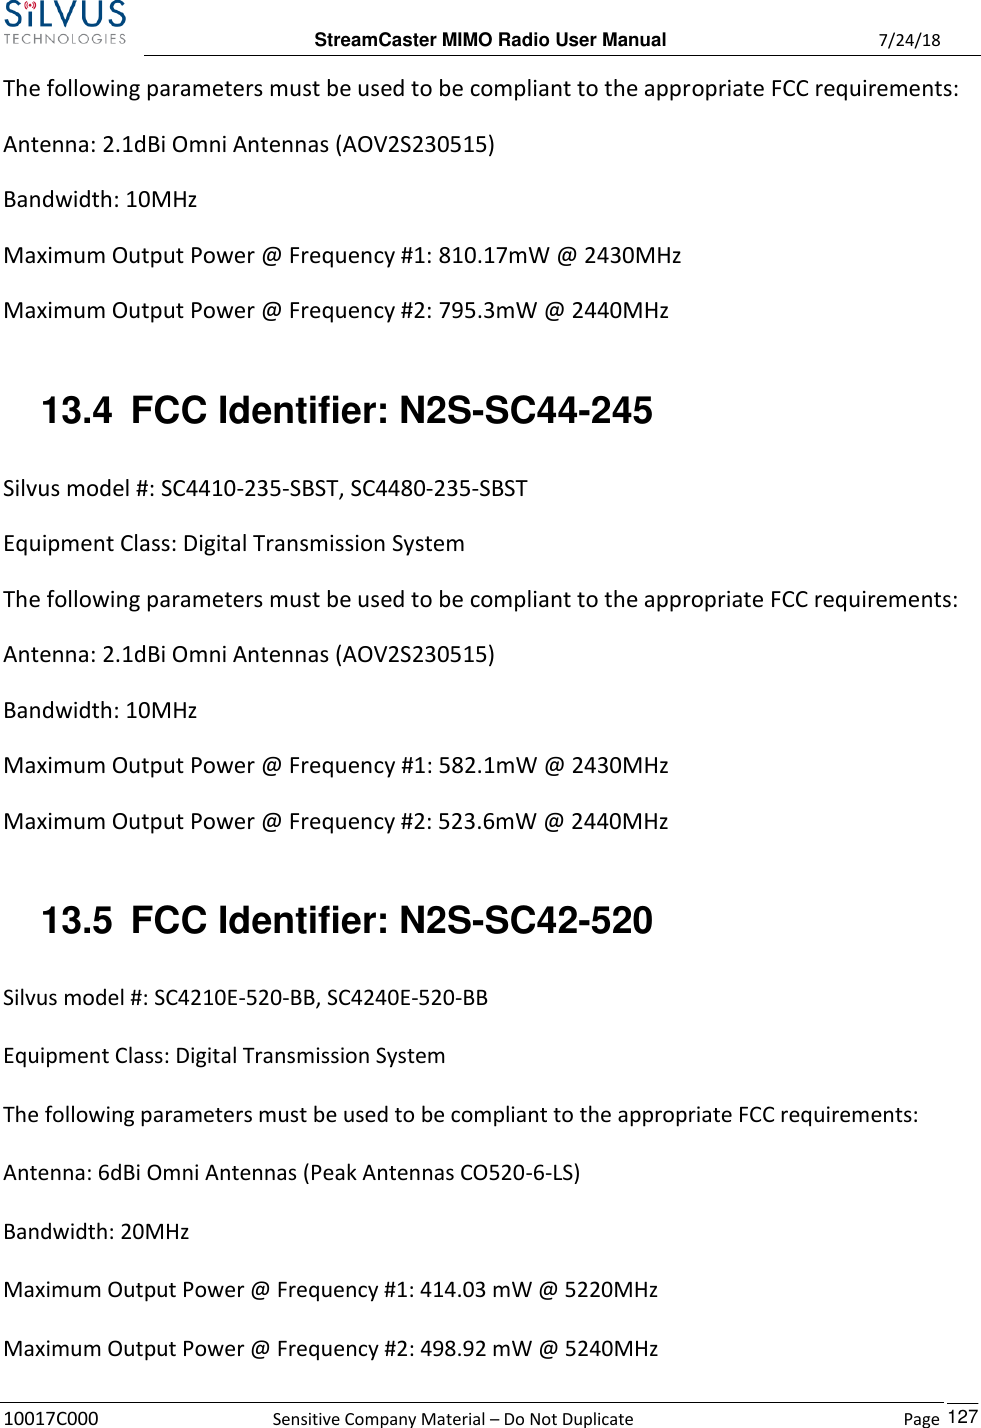  StreamCaster MIMO Radio User Manual  7/24/18 10017C000  Sensitive Company Material – Do Not Duplicate    Page    127 The following parameters must be used to be compliant to the appropriate FCC requirements:  Antenna: 2.1dBi Omni Antennas (AOV2S230515) Bandwidth: 10MHz Maximum Output Power @ Frequency #1: 810.17mW @ 2430MHz Maximum Output Power @ Frequency #2: 795.3mW @ 2440MHz  13.4  FCC Identifier: N2S-SC44-245 Silvus model #: SC4410-235-SBST, SC4480-235-SBST Equipment Class: Digital Transmission System The following parameters must be used to be compliant to the appropriate FCC requirements:  Antenna: 2.1dBi Omni Antennas (AOV2S230515) Bandwidth: 10MHz Maximum Output Power @ Frequency #1: 582.1mW @ 2430MHz Maximum Output Power @ Frequency #2: 523.6mW @ 2440MHz  13.5  FCC Identifier: N2S-SC42-520  Silvus model #: SC4210E-520-BB, SC4240E-520-BB   Equipment Class: Digital Transmission System   The following parameters must be used to be compliant to the appropriate FCC requirements:   Antenna: 6dBi Omni Antennas (Peak Antennas CO520-6-LS)   Bandwidth: 20MHz   Maximum Output Power @ Frequency #1: 414.03 mW @ 5220MHz   Maximum Output Power @ Frequency #2: 498.92 mW @ 5240MHz 